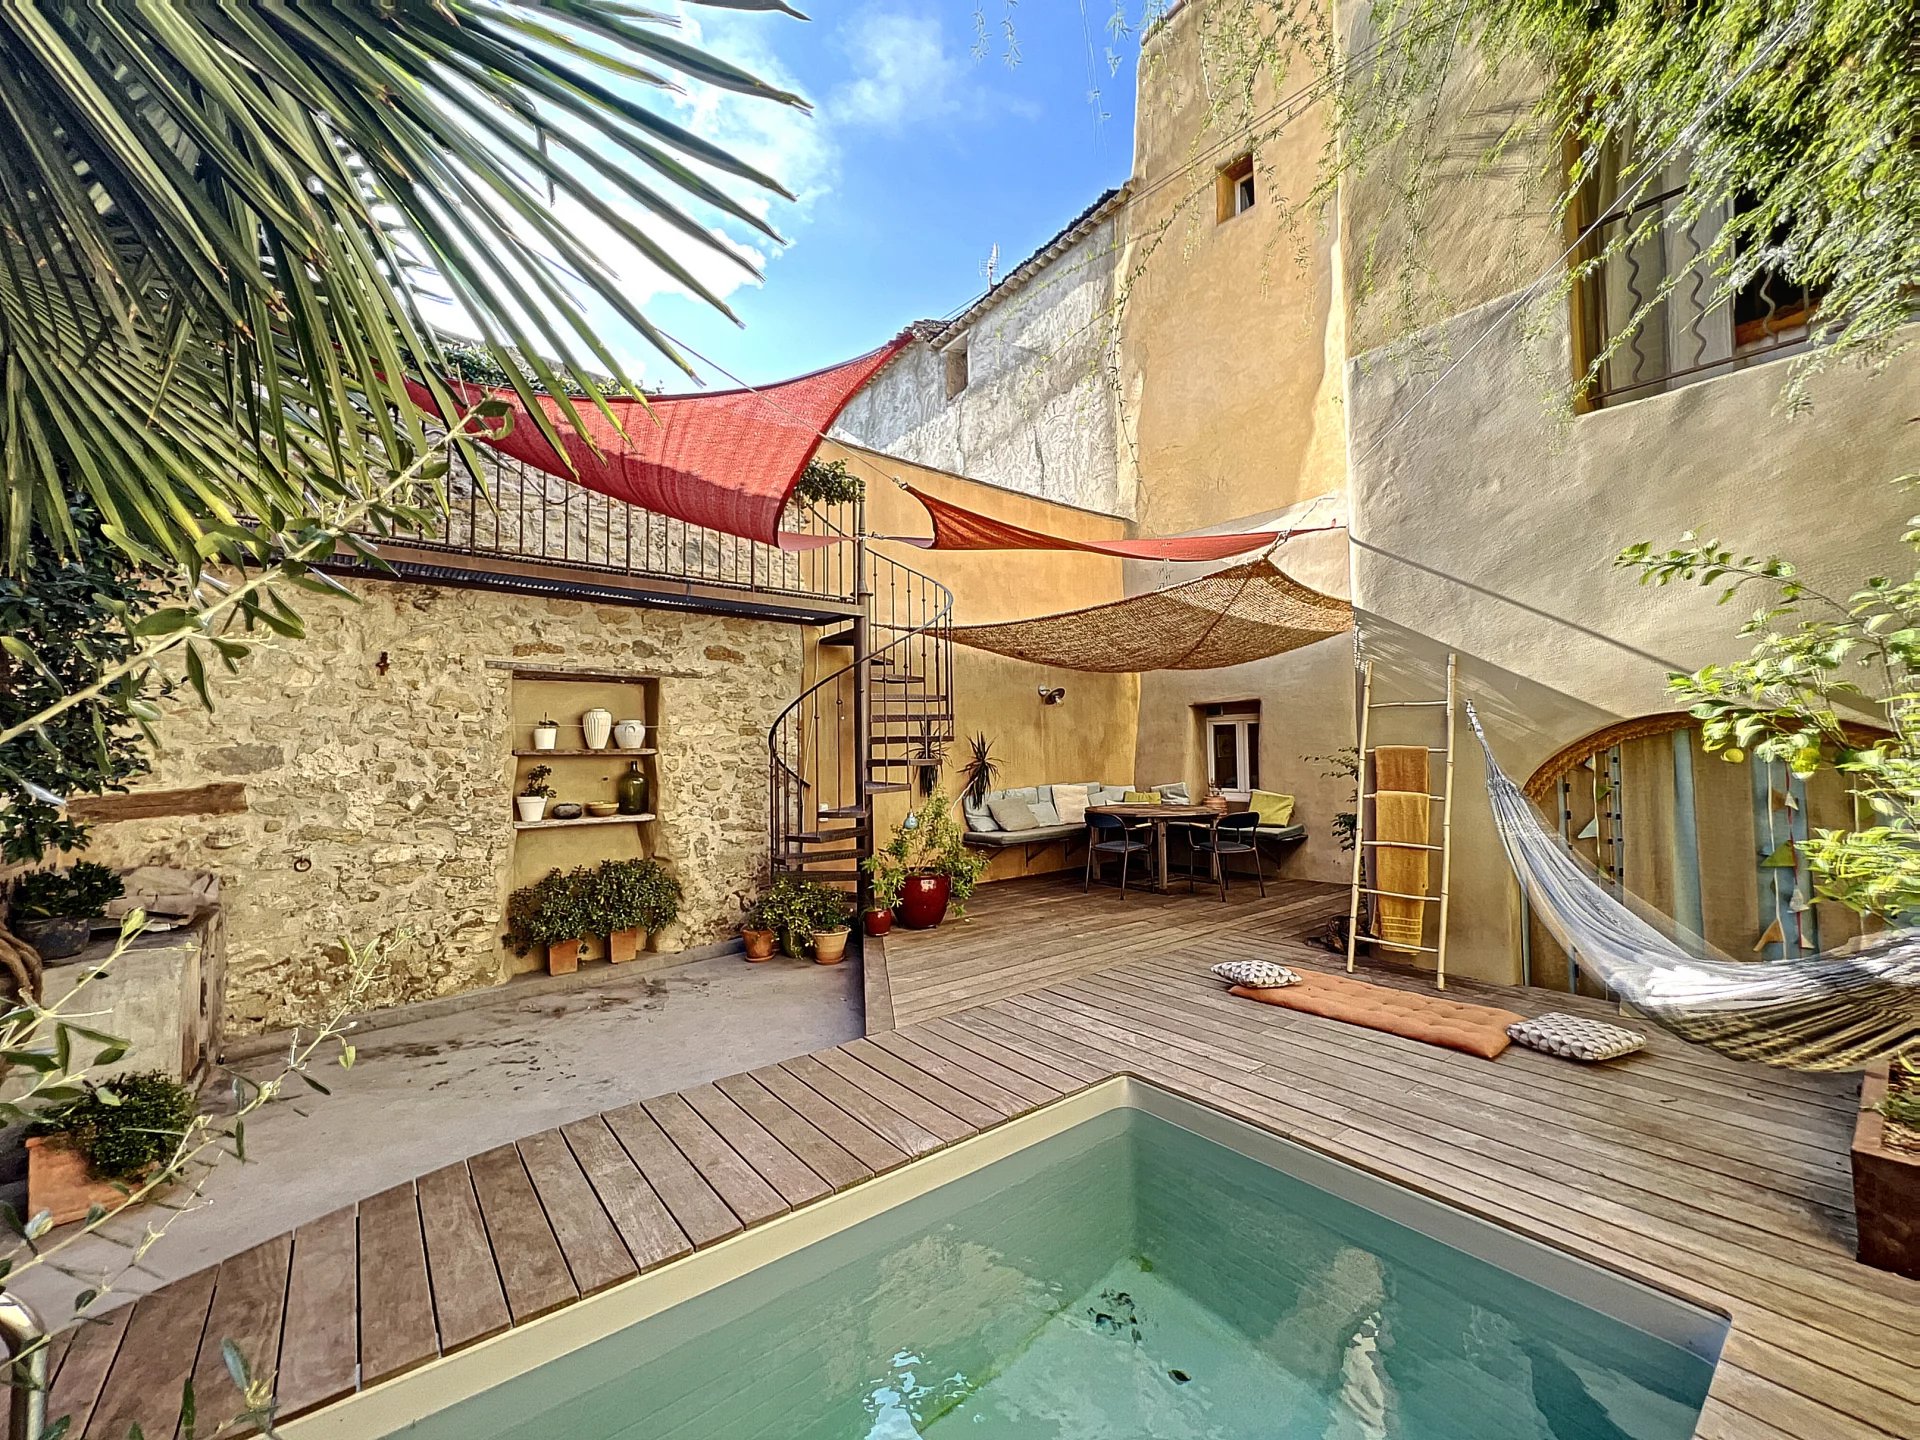 Village house with courtyard, swimming pool and outbuilding, Moussan